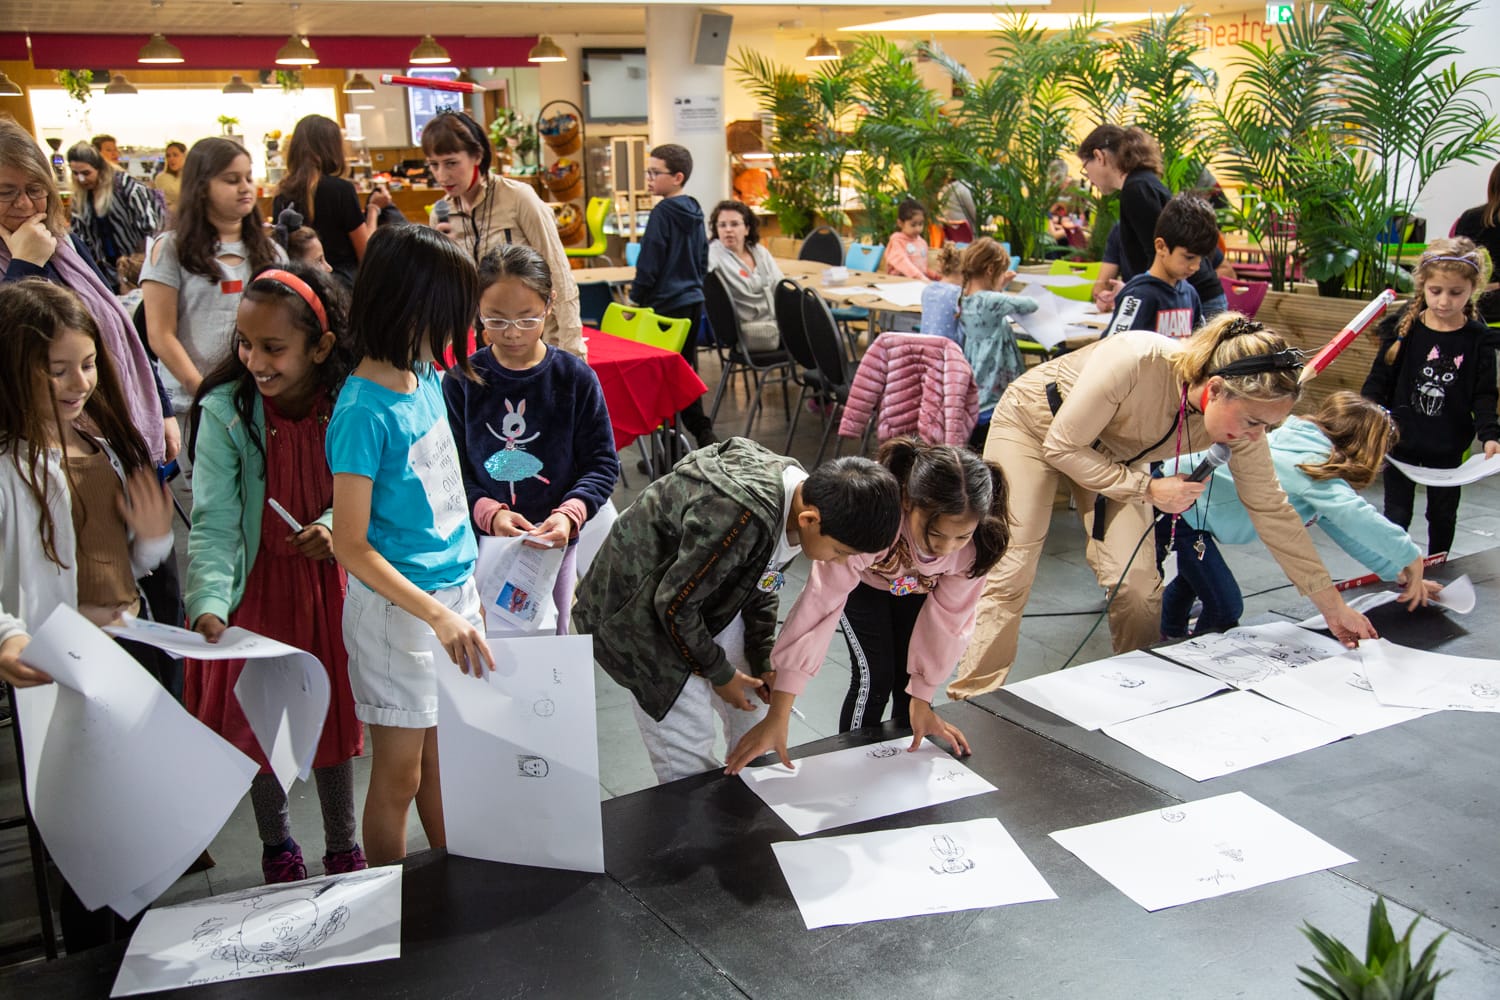 A diverse group of children and parents are gathered in the artsdepot cafe, smiling, chatting, and working on pencil drawings. At the front, several children are holding large a3 sheets of paper.